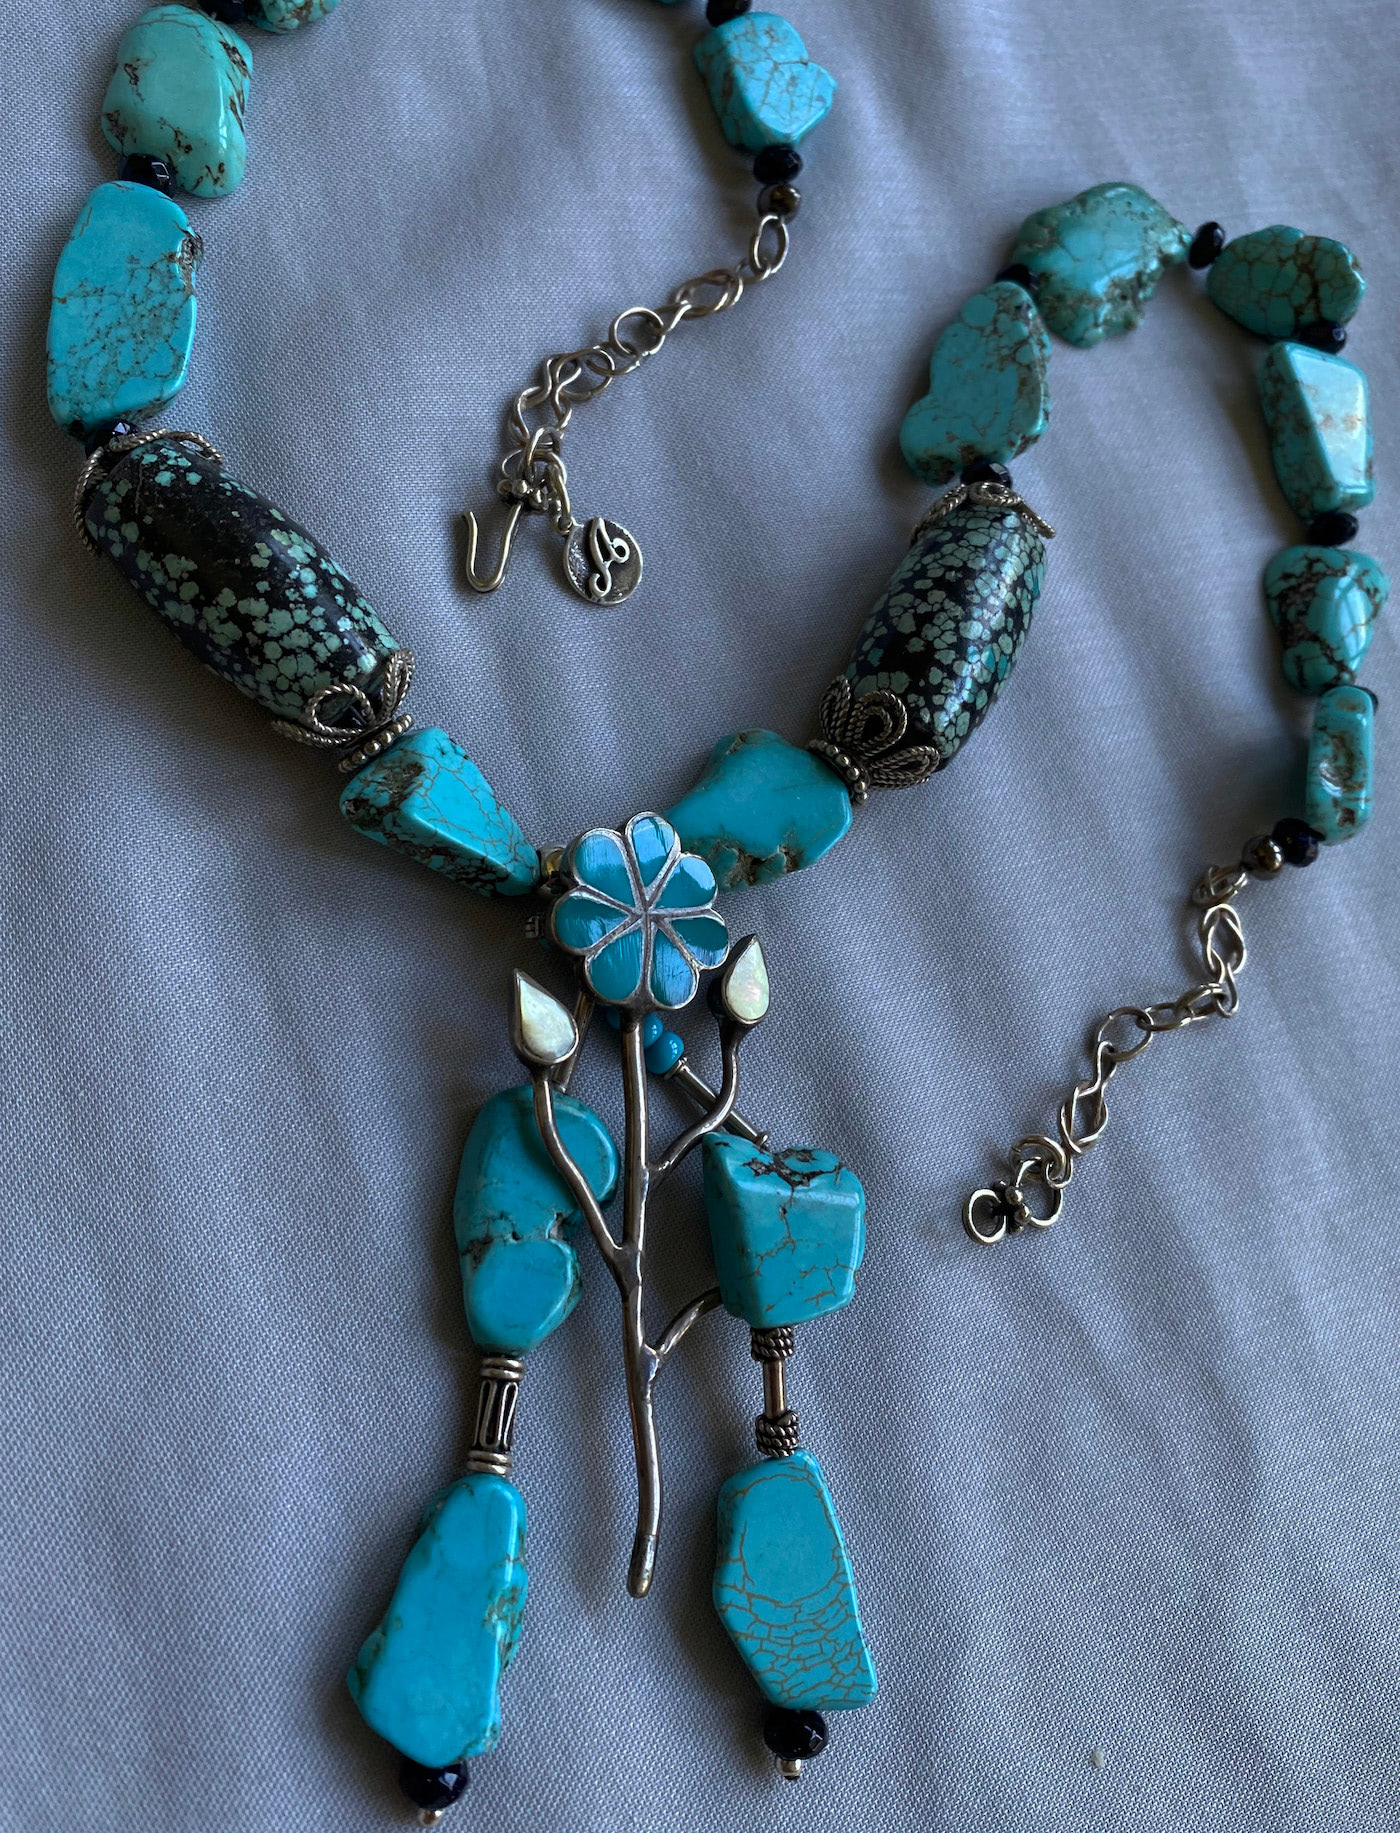 Lia Sophia Necklace with chunky turquoise color pendant | eBay